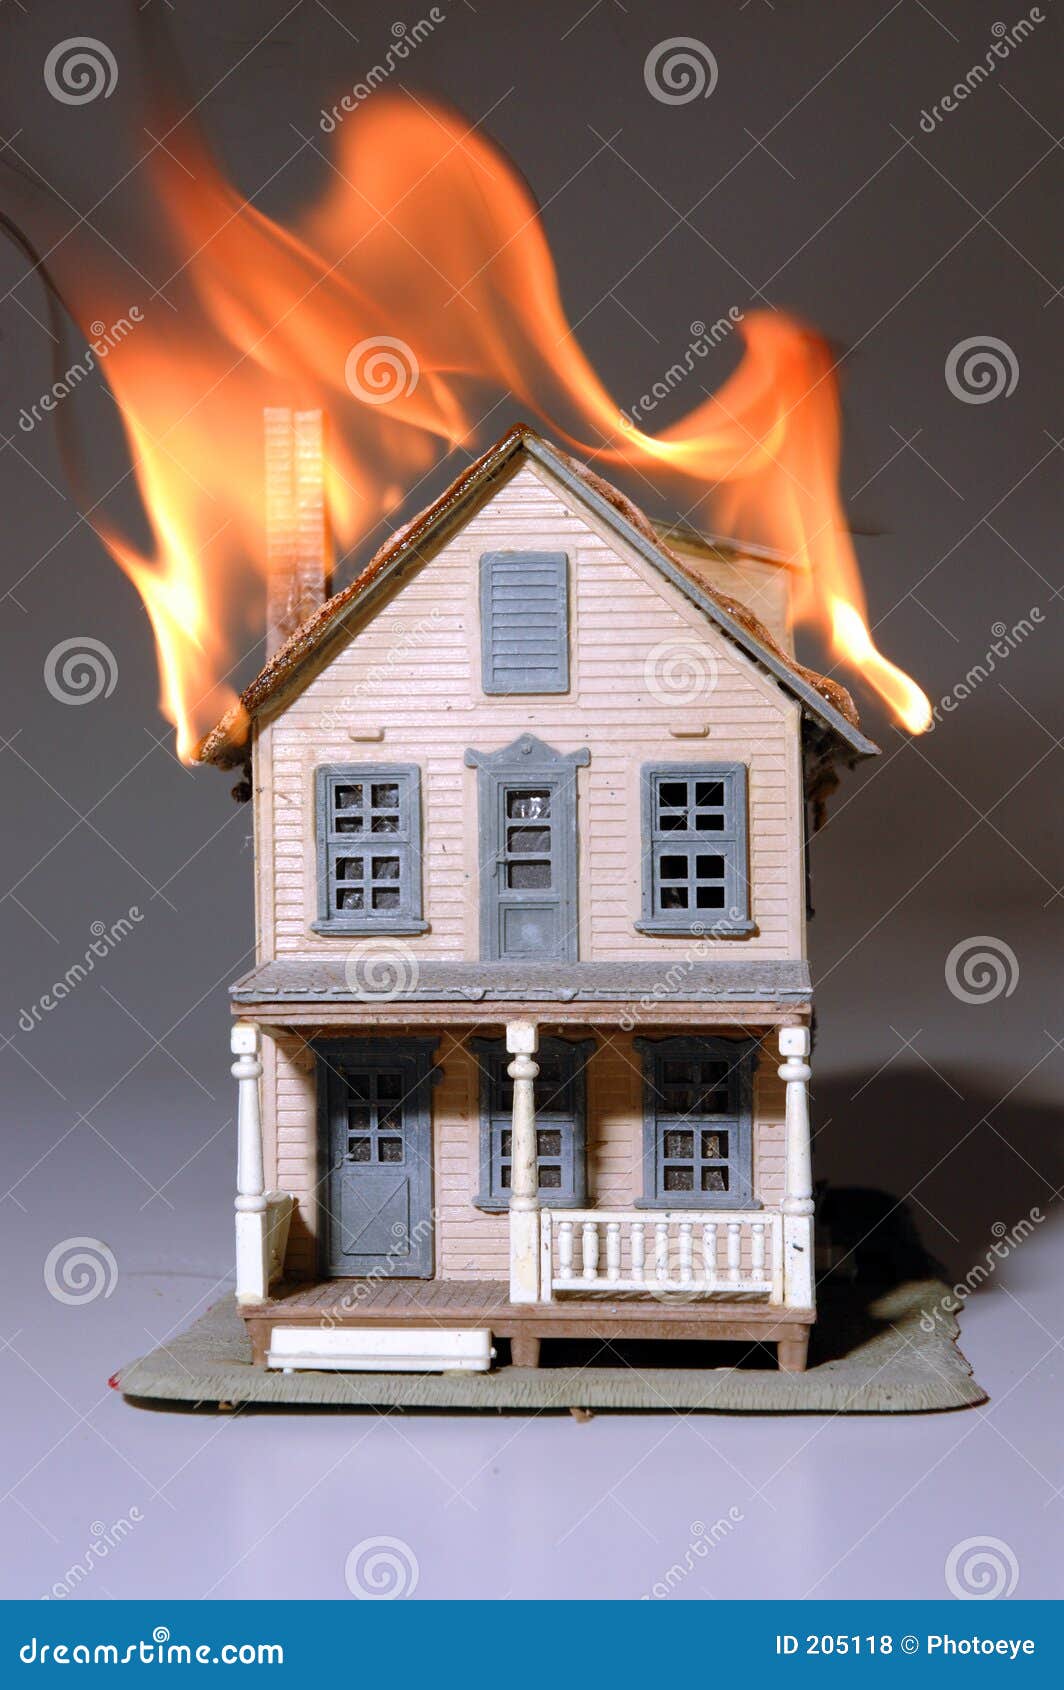 house on fire clipart - photo #38